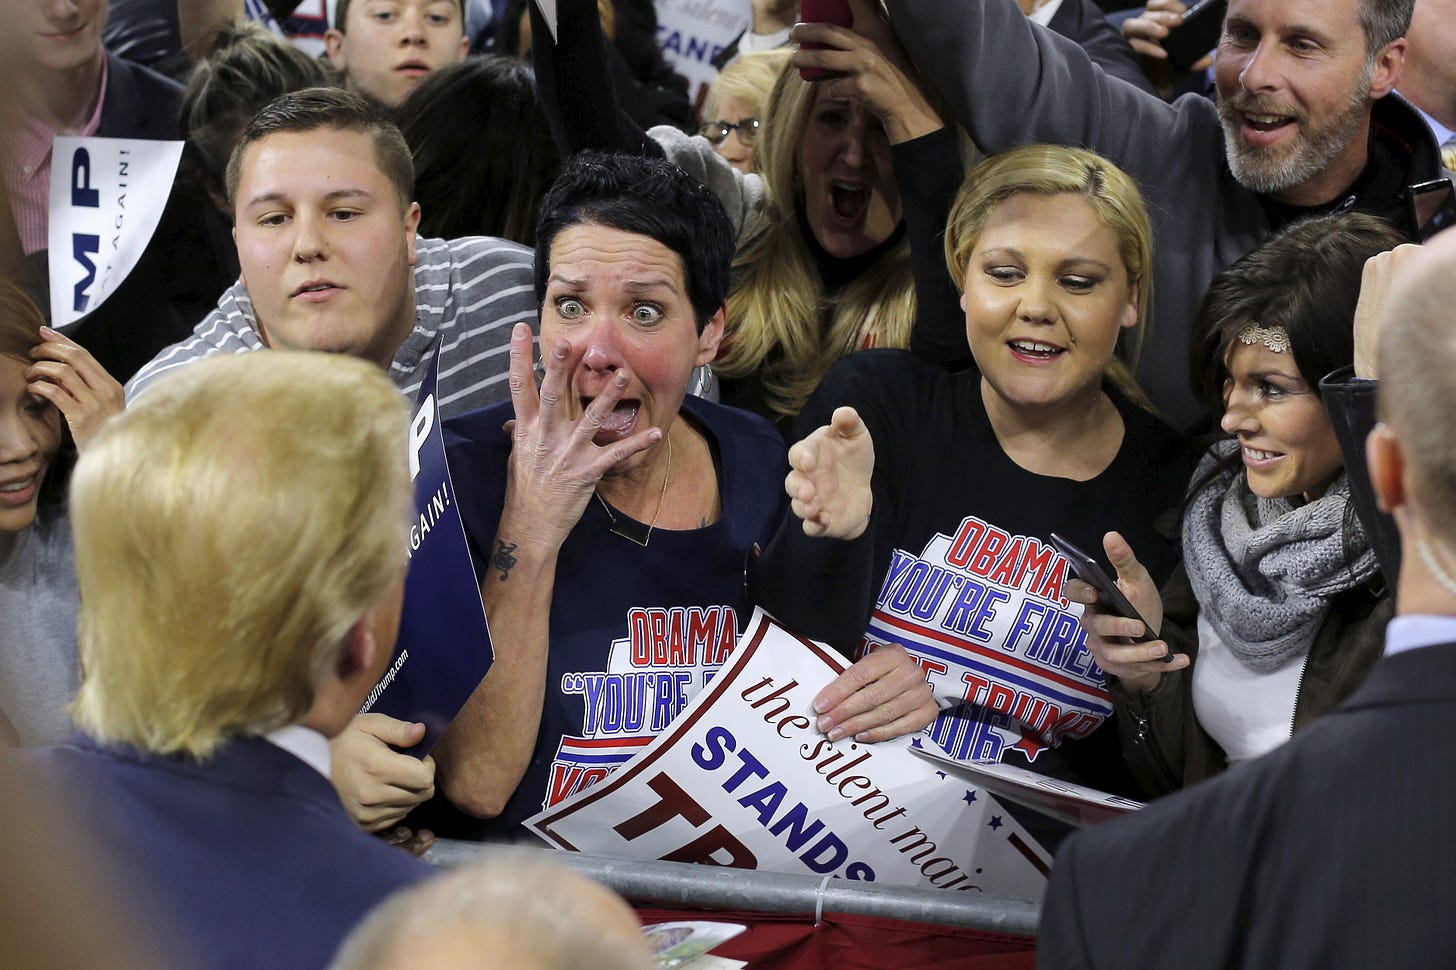 This image of a woman fawning over #45 is used here in a non-profit, educational capacity to illustrate how Cult45ers Stan the former President.